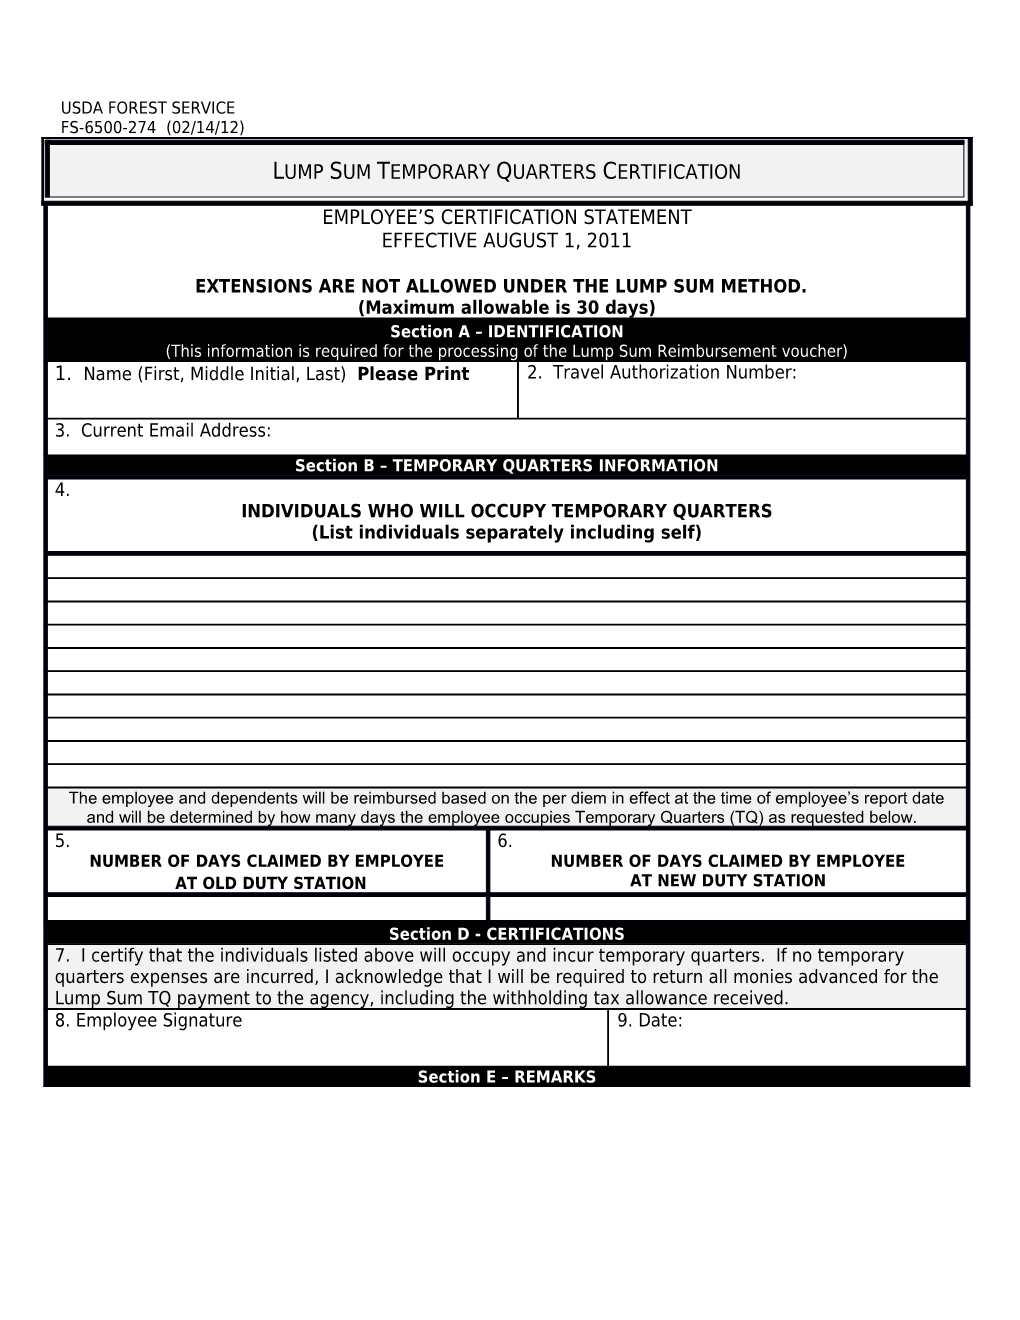 Please Complete This Form and FAX to 1-866-689-4968